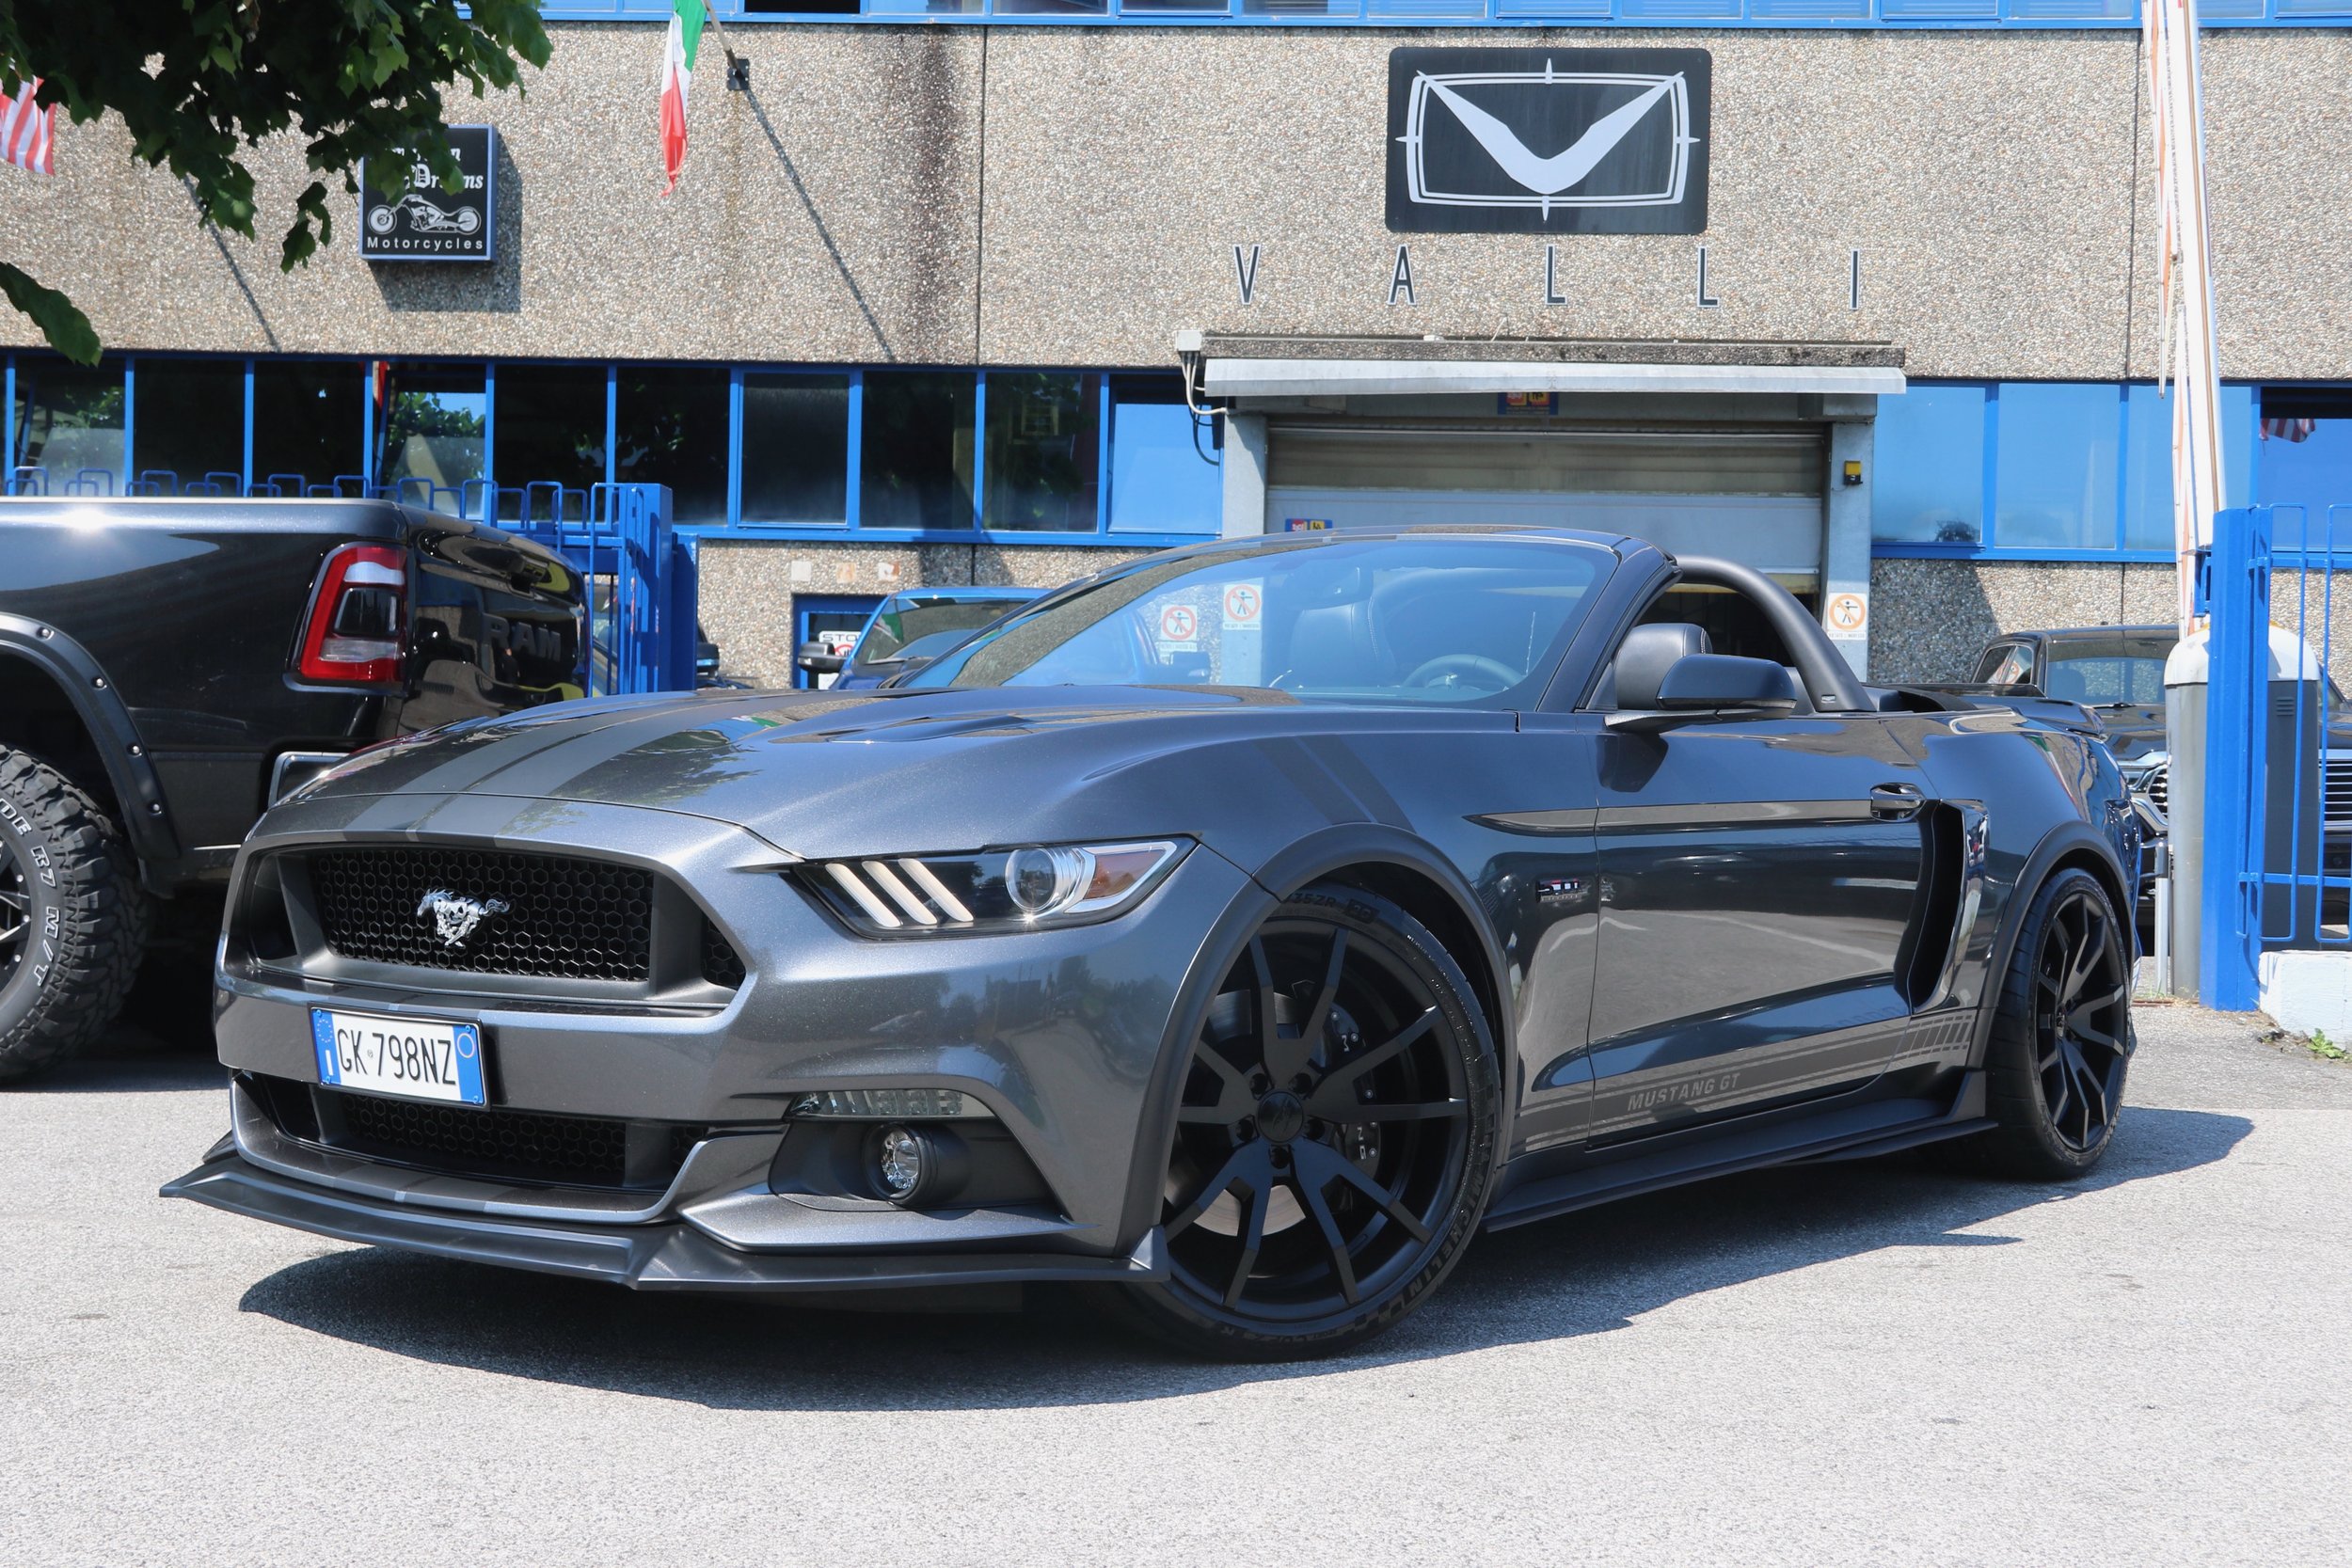 01 2015 Mustang GT 5.0L Coyote Convertible Marco Vignale.jpeg